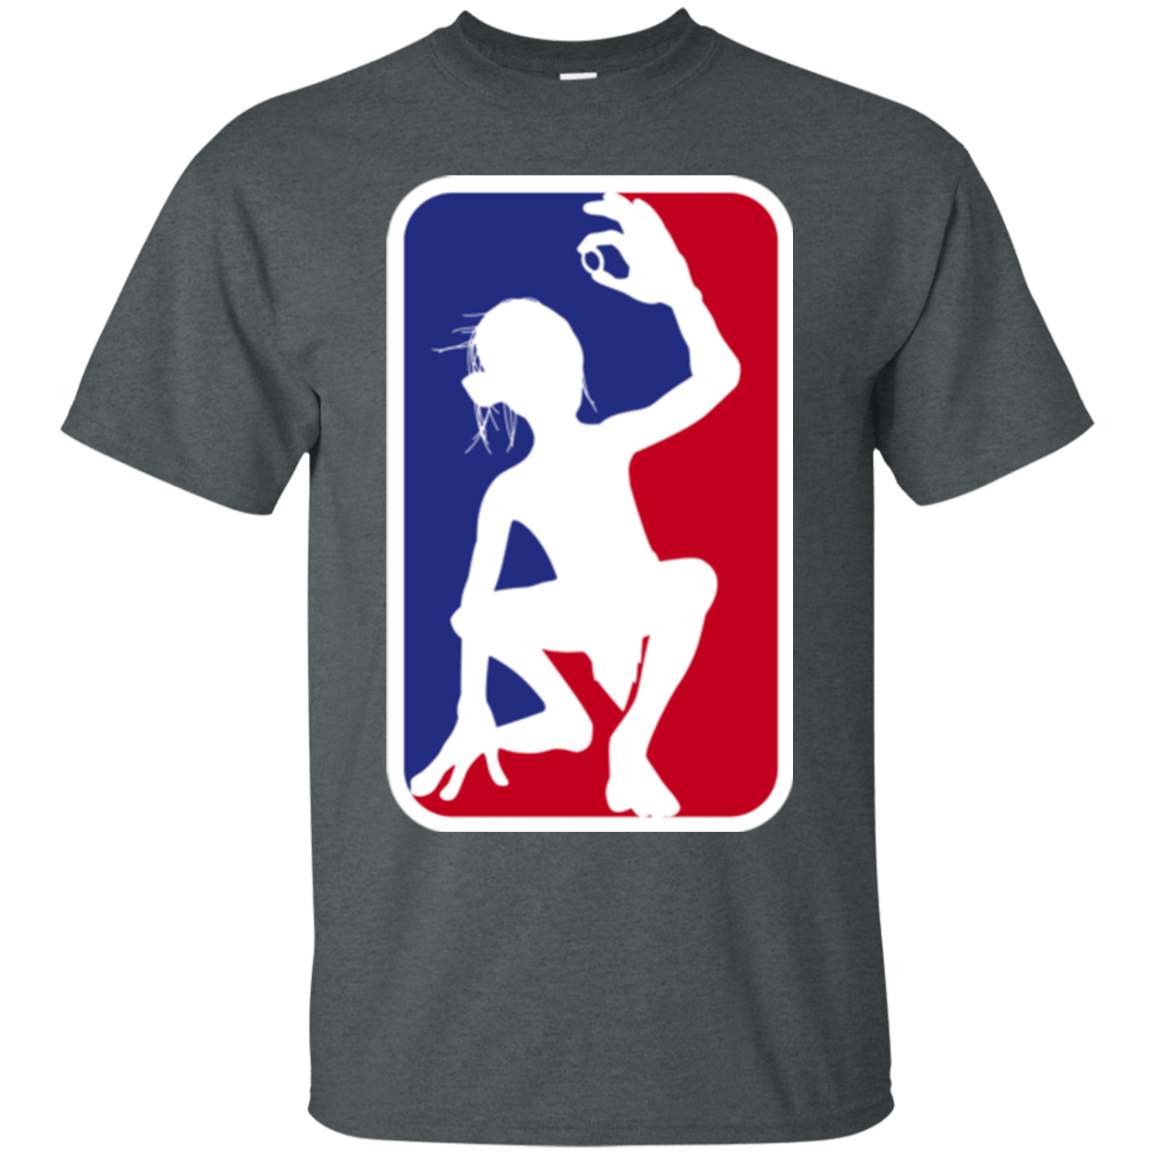 T-Shirts Dark Heather / Small Ring Finders League T-Shirt